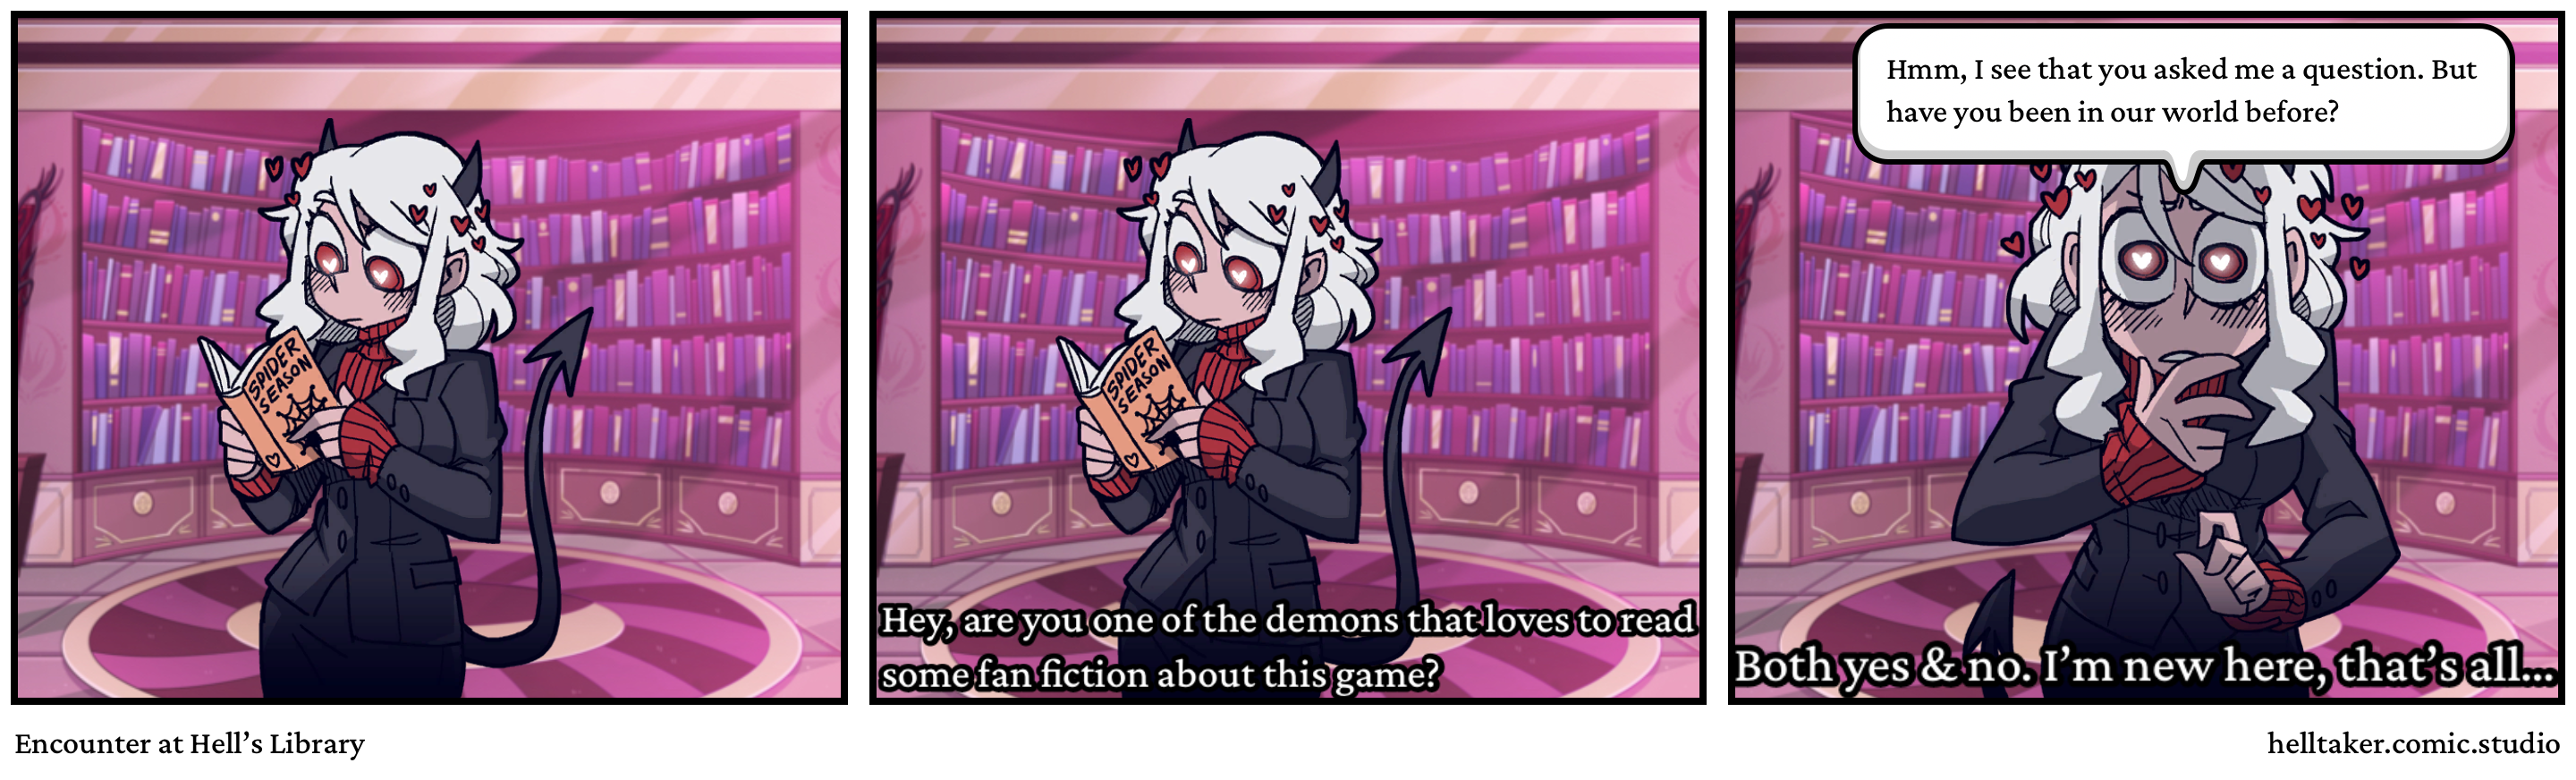 Encounter at Hell’s Library